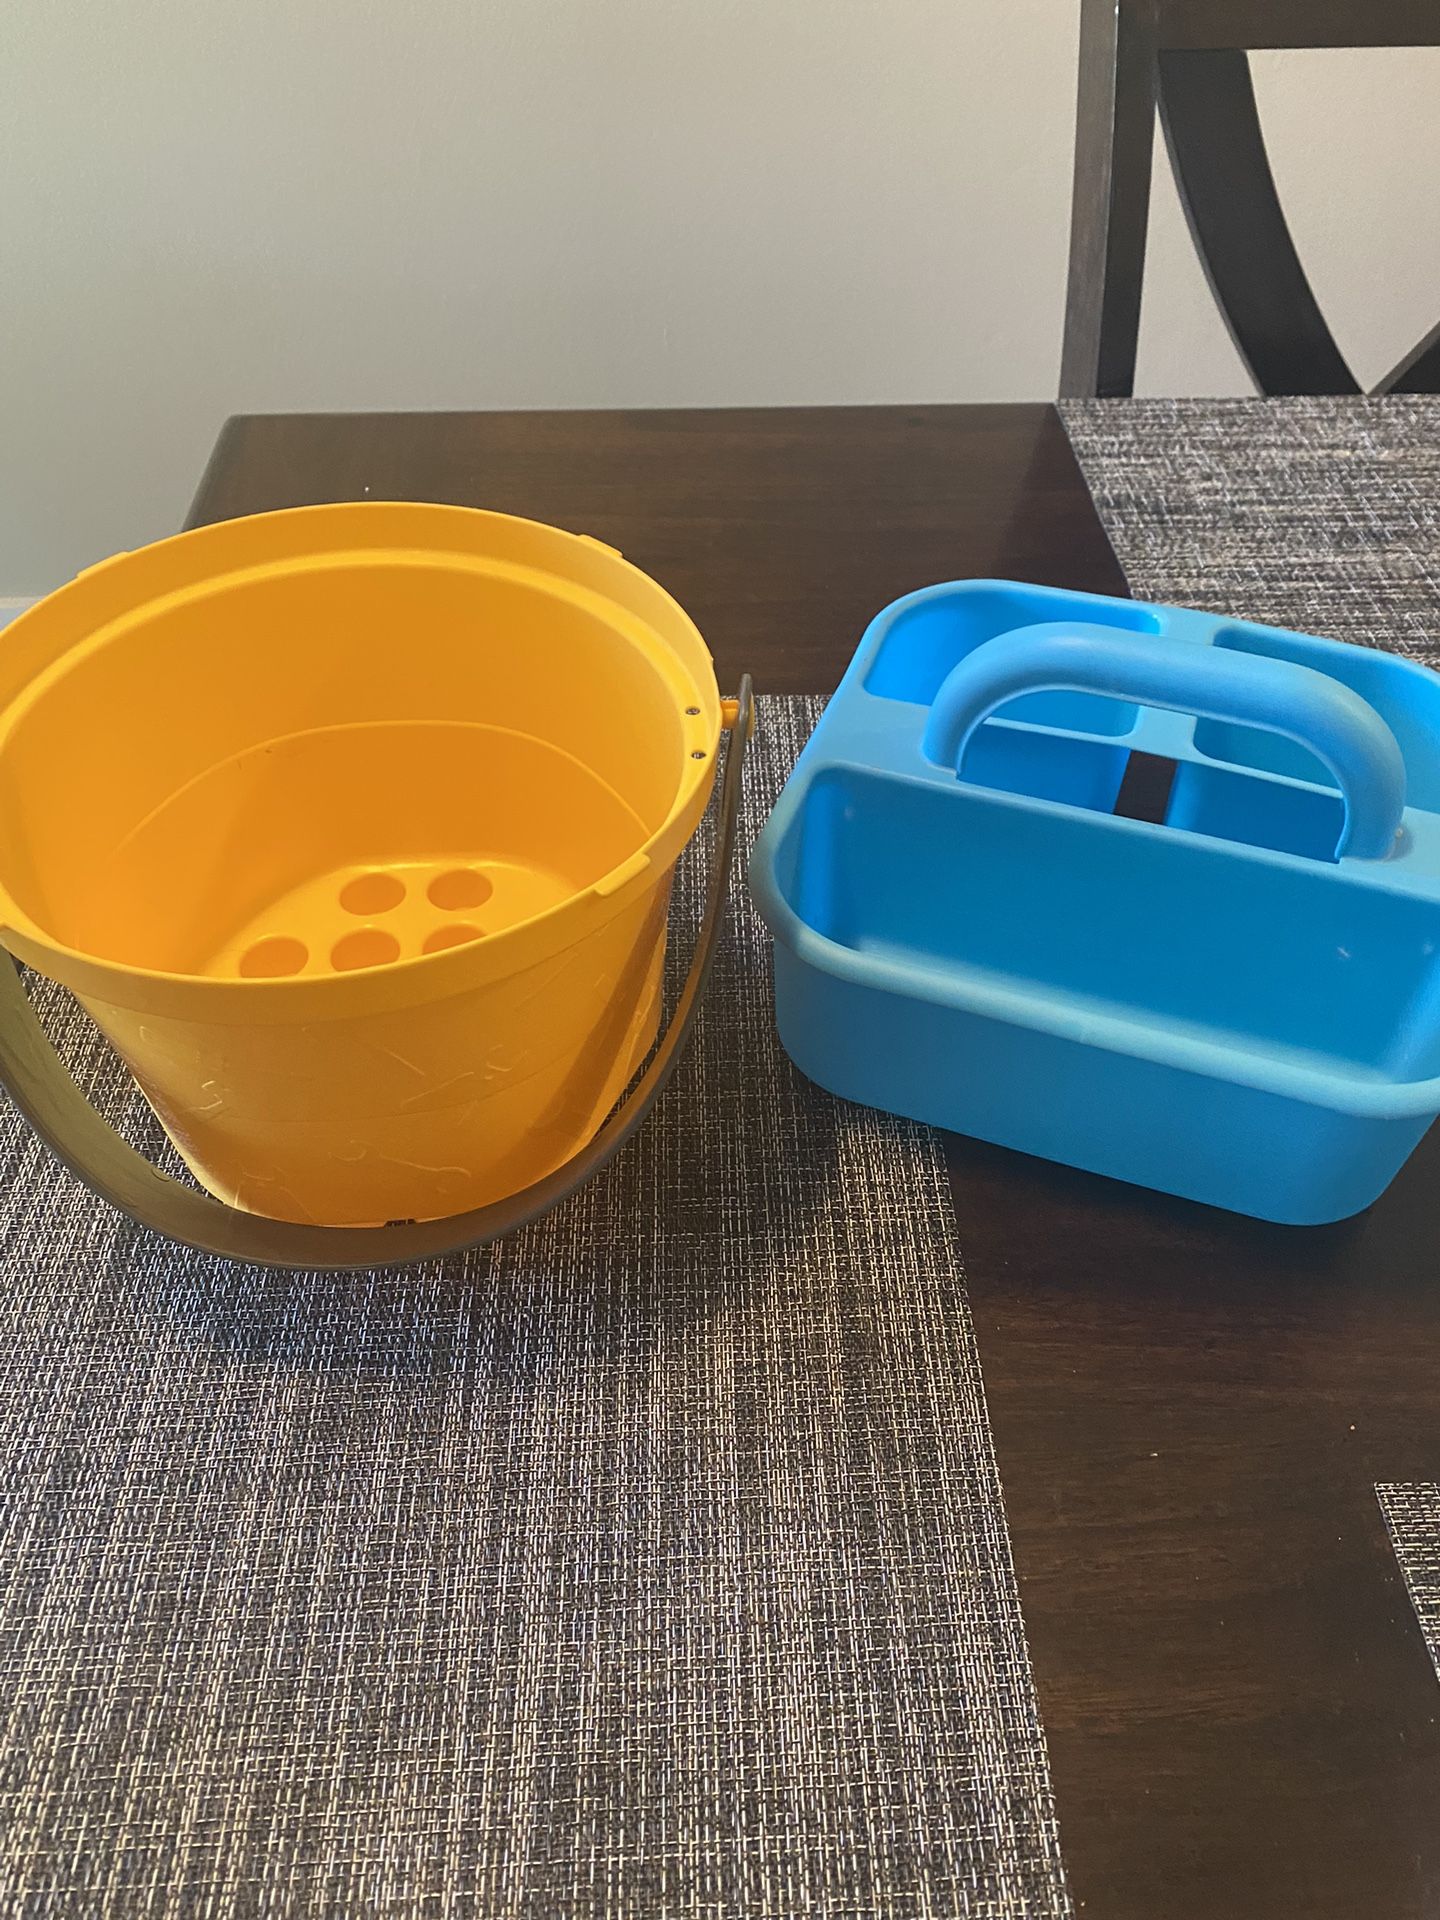 Kids Tool Bucket And Blue Caddy 